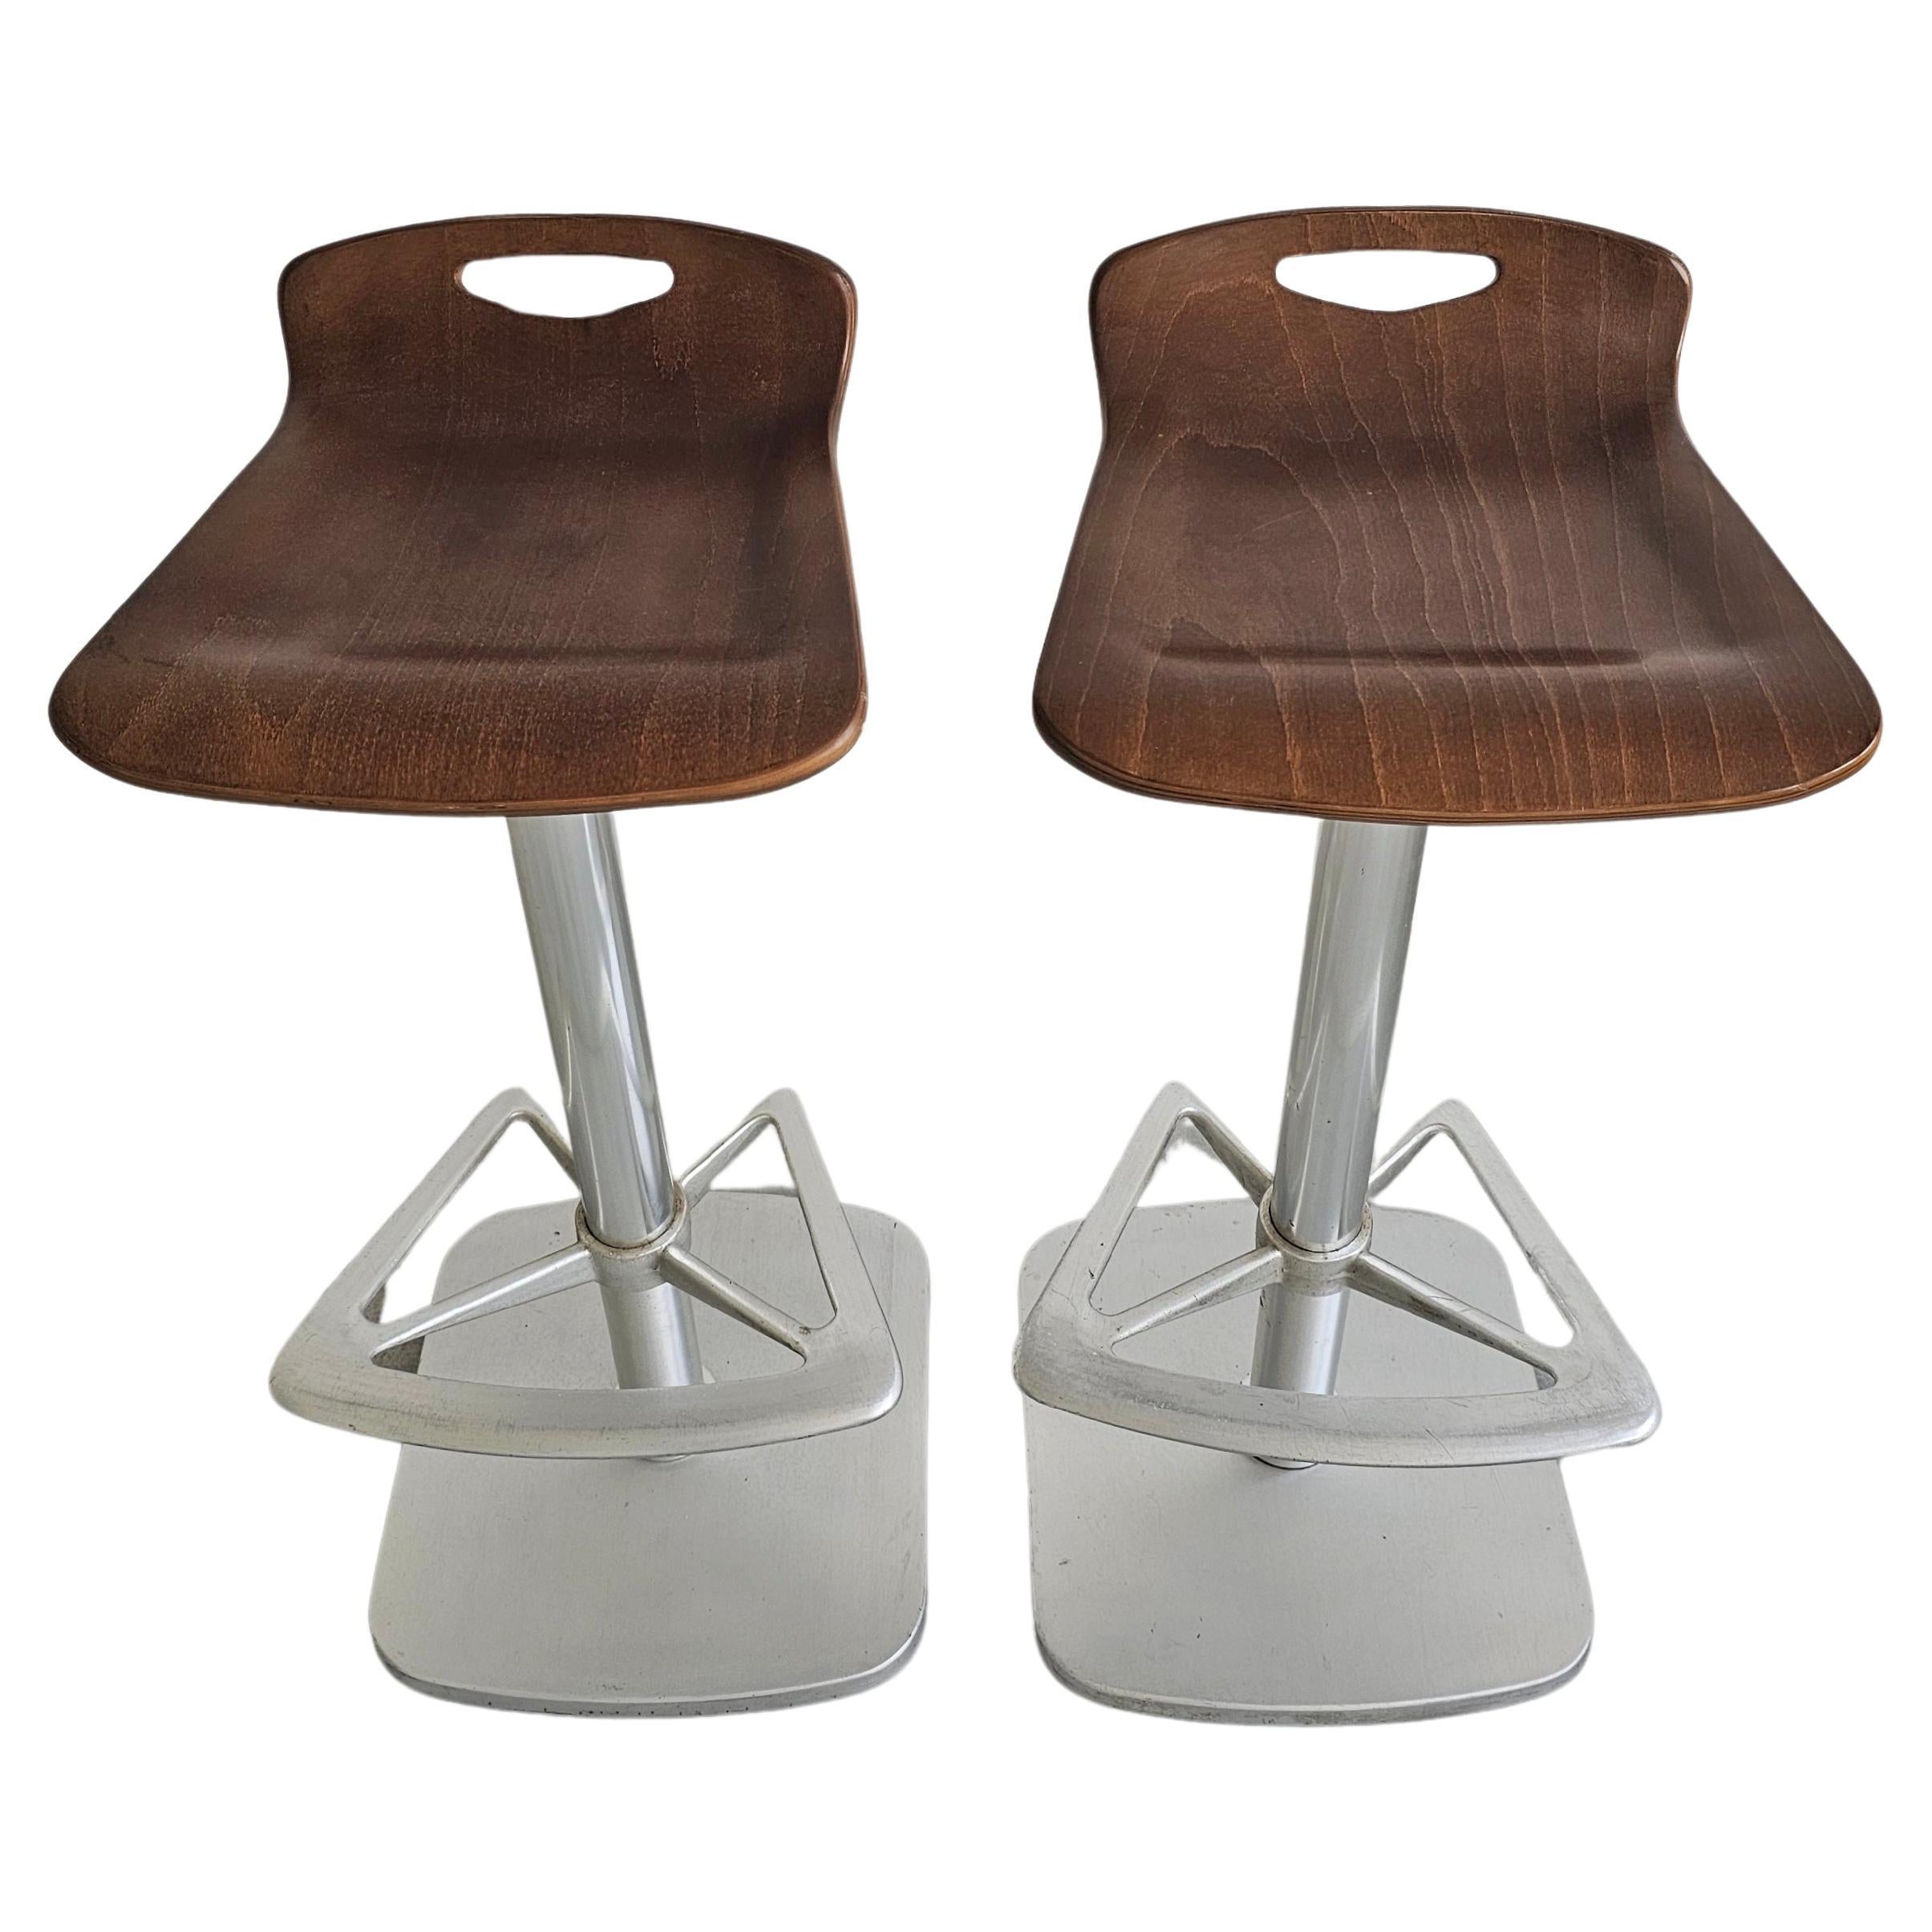 Pair of Postmodern Bar Stools by Indecasa designed by Joan Casas, Spain 1980s